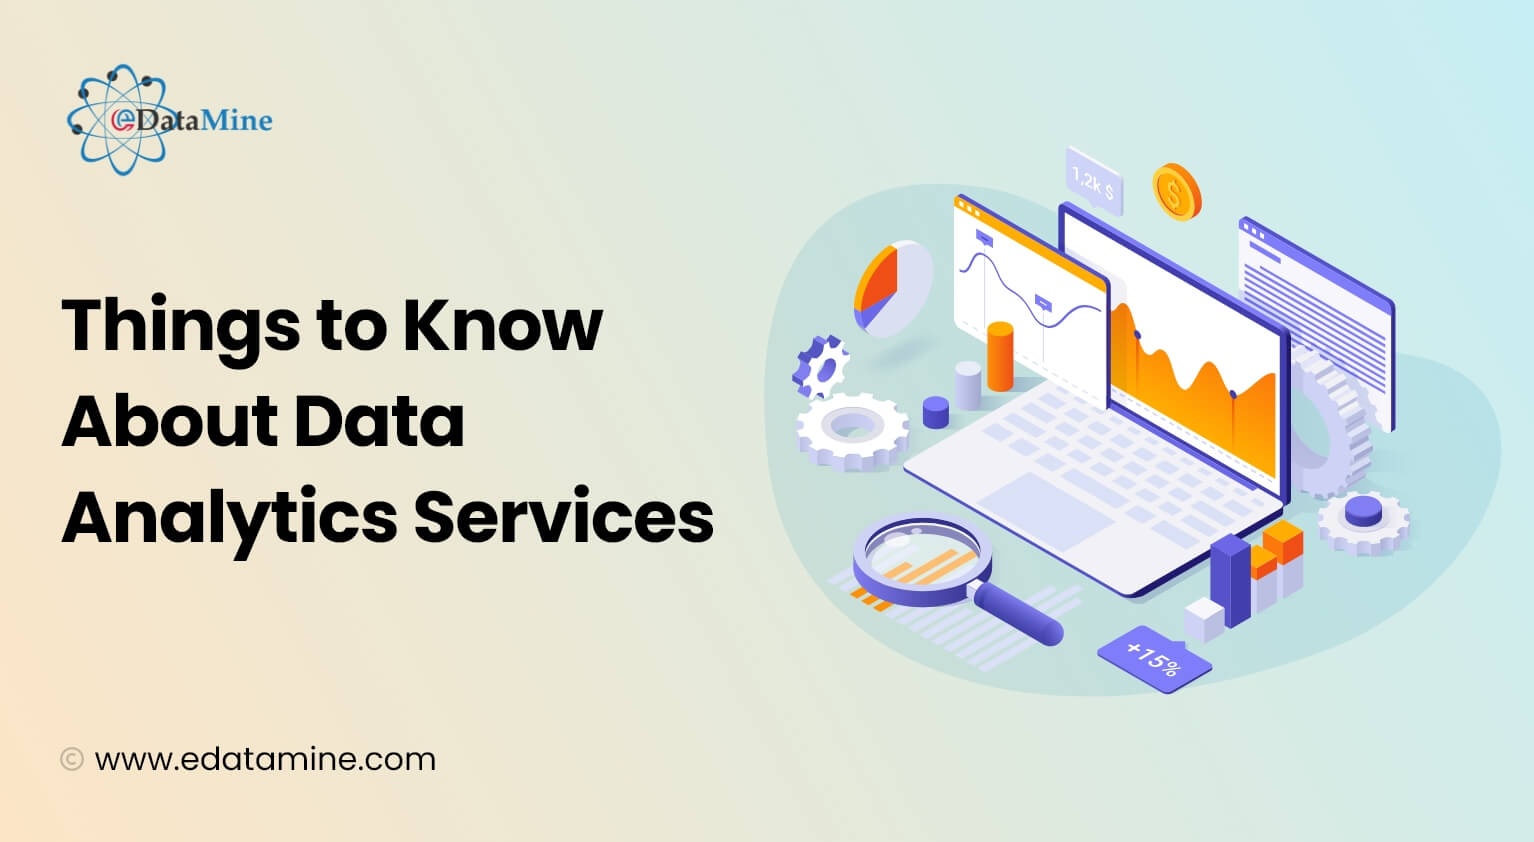 Things to Know About Data Analytics Services